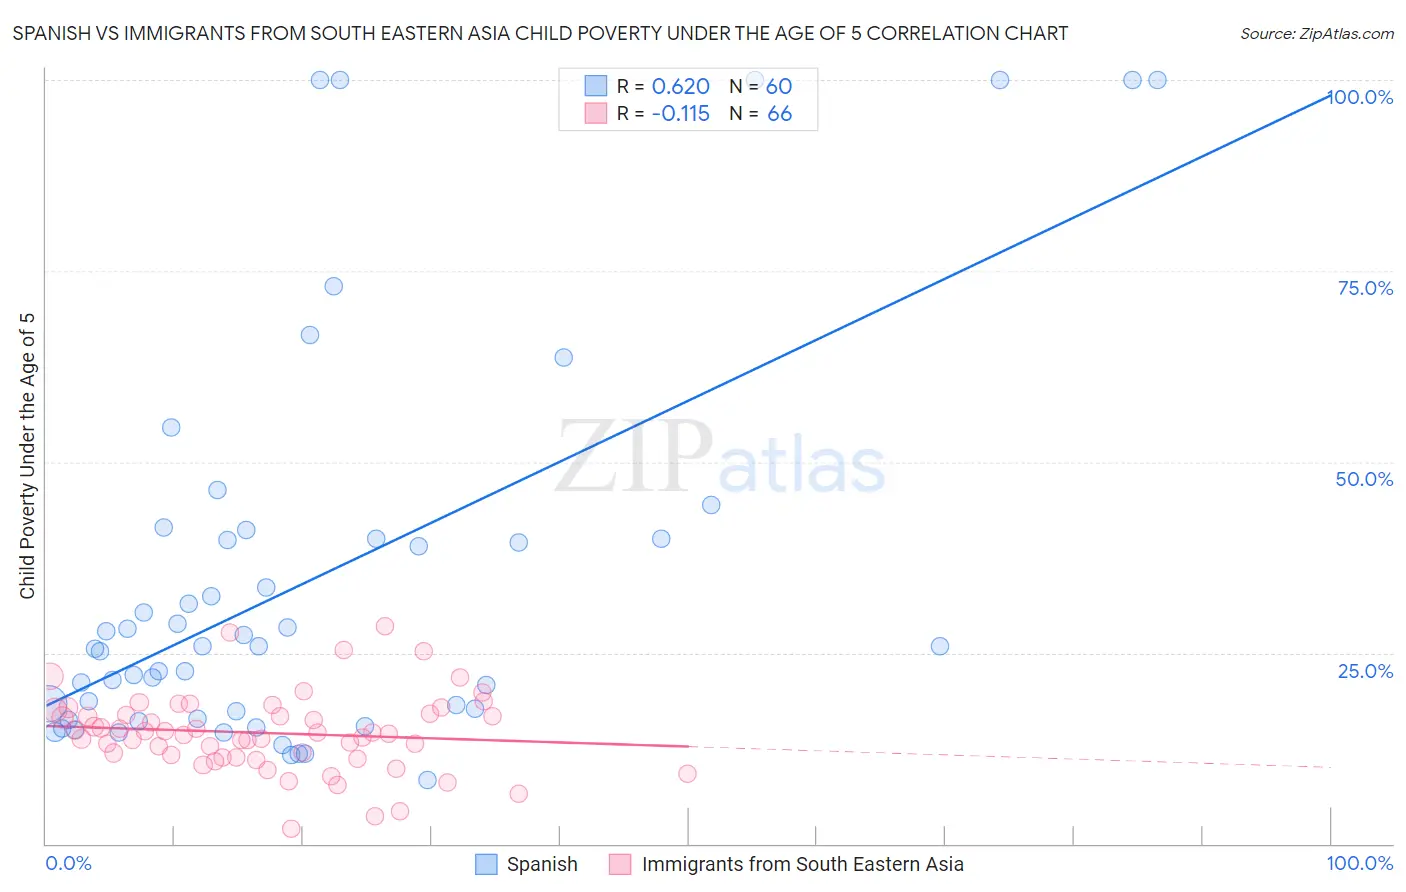 Spanish vs Immigrants from South Eastern Asia Child Poverty Under the Age of 5